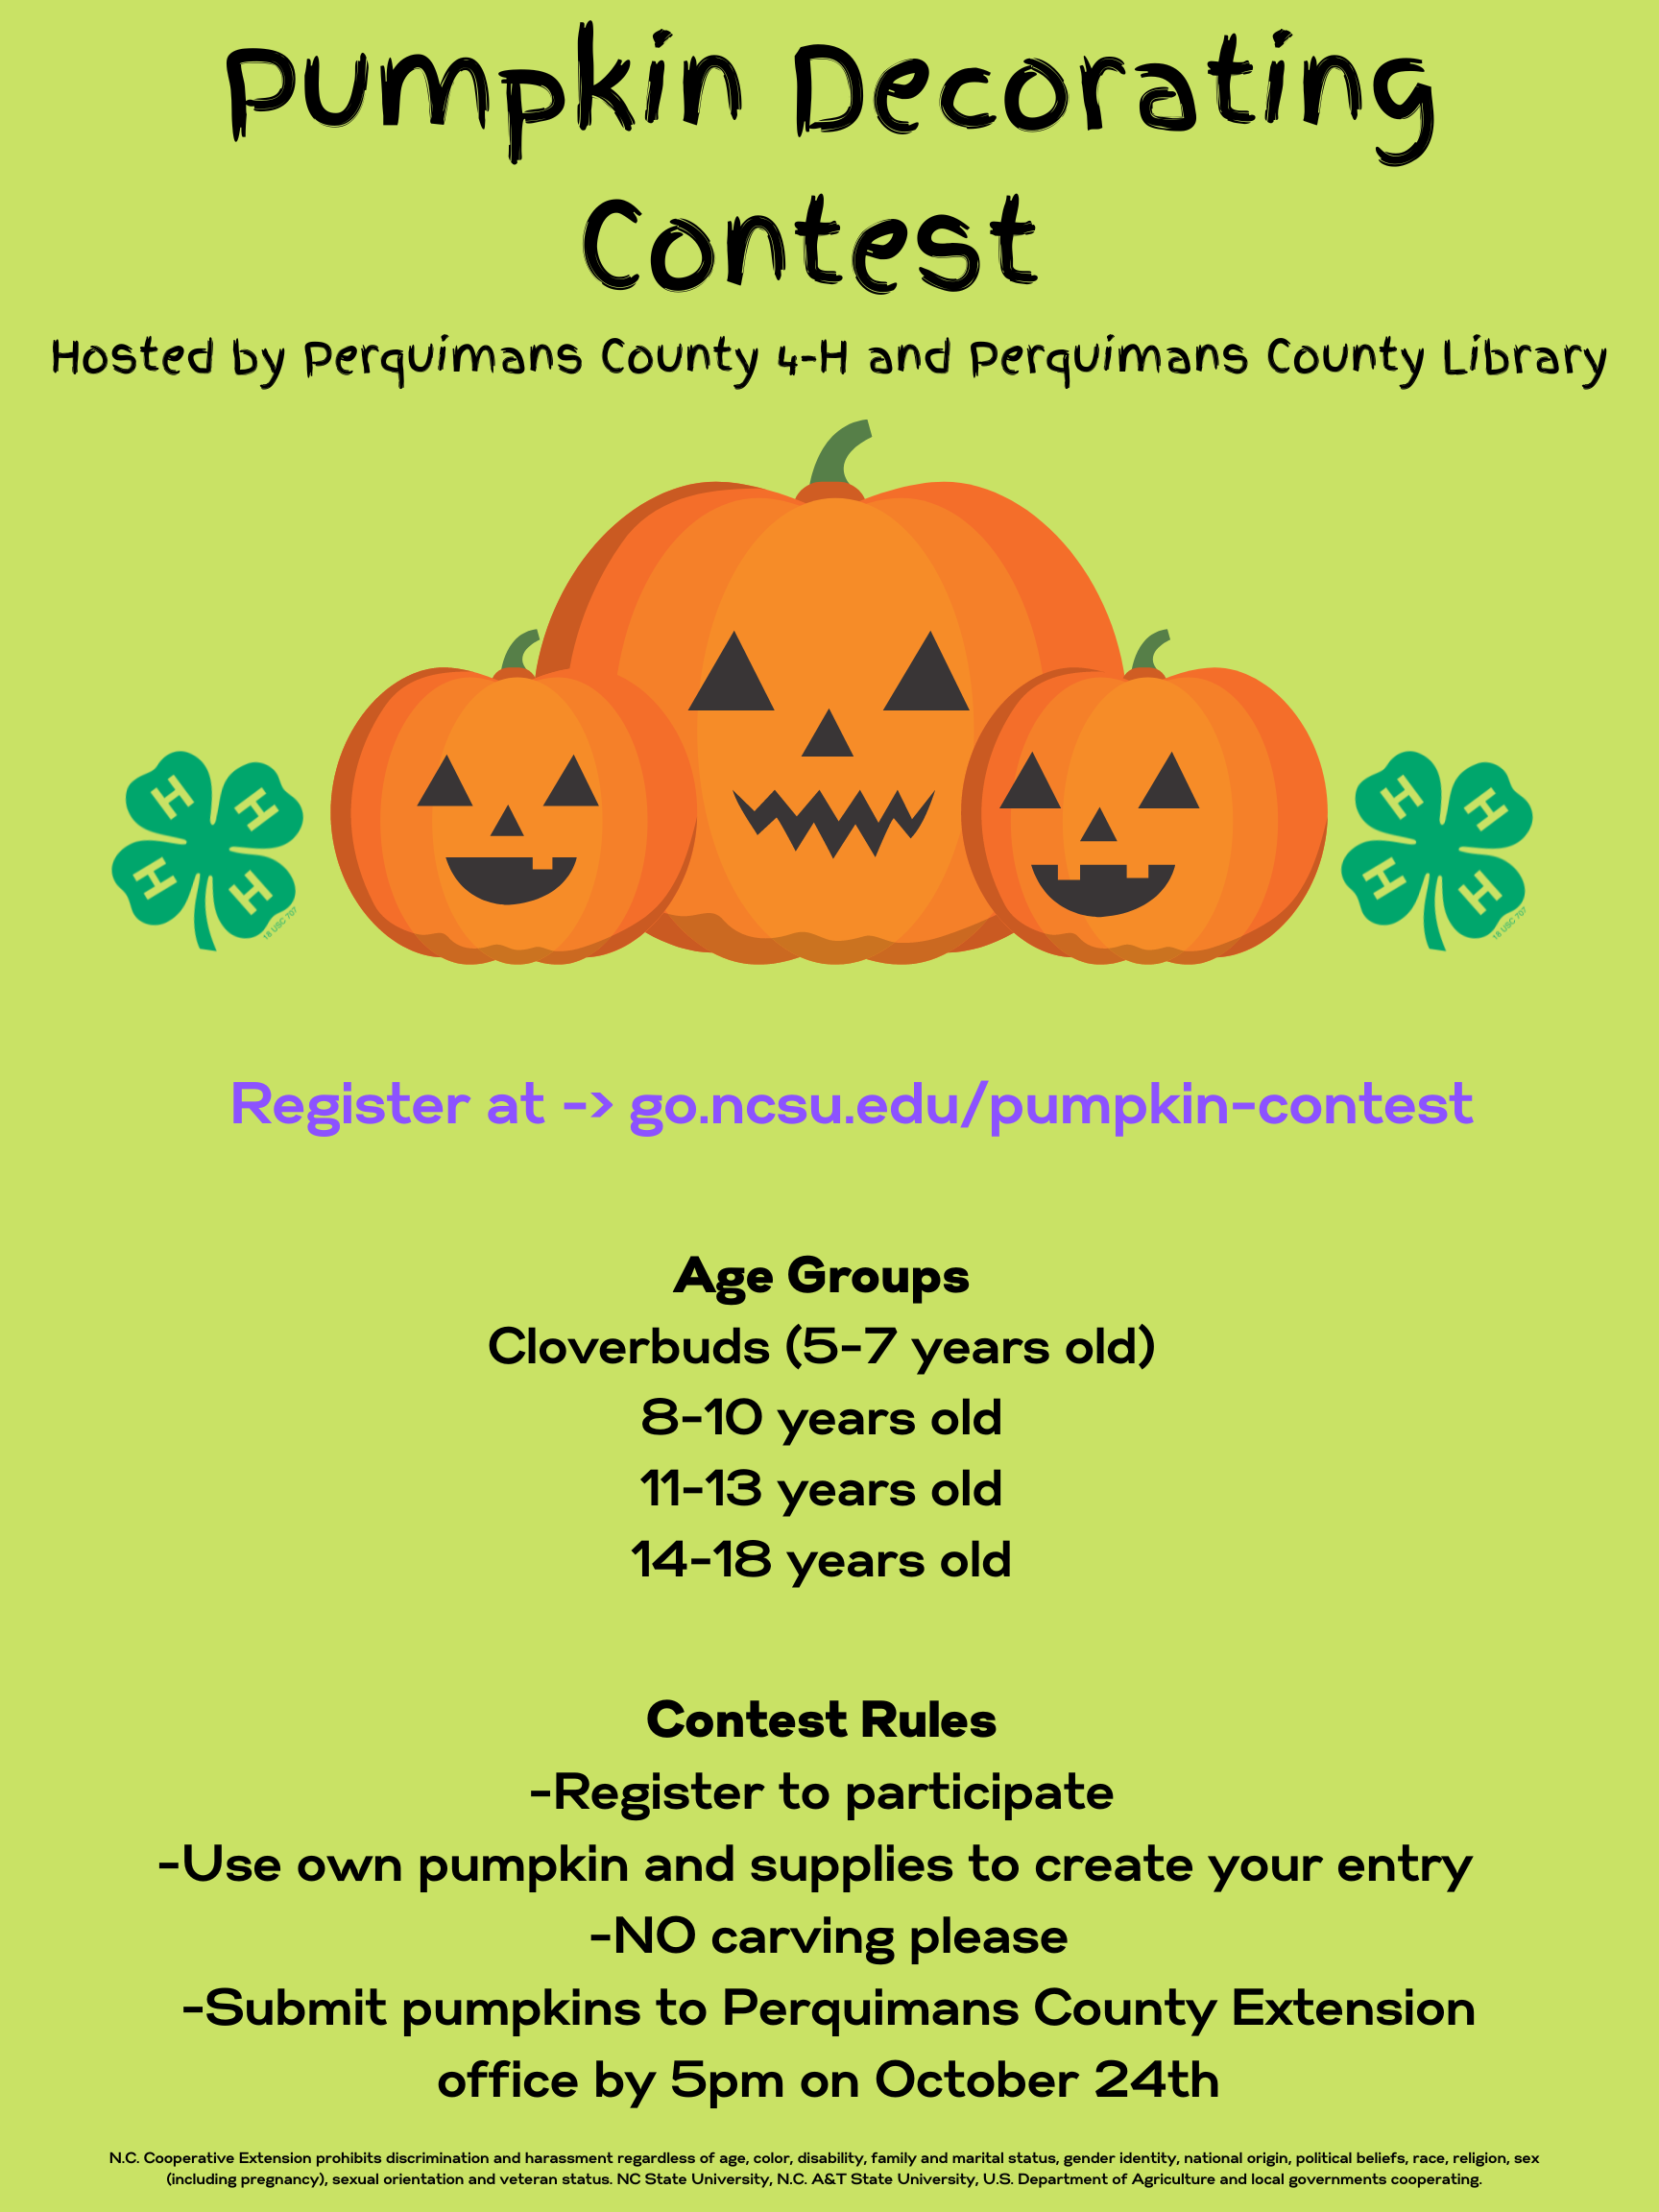 4-H Pumpkin Decorating Contest | Extension Marketing and ...